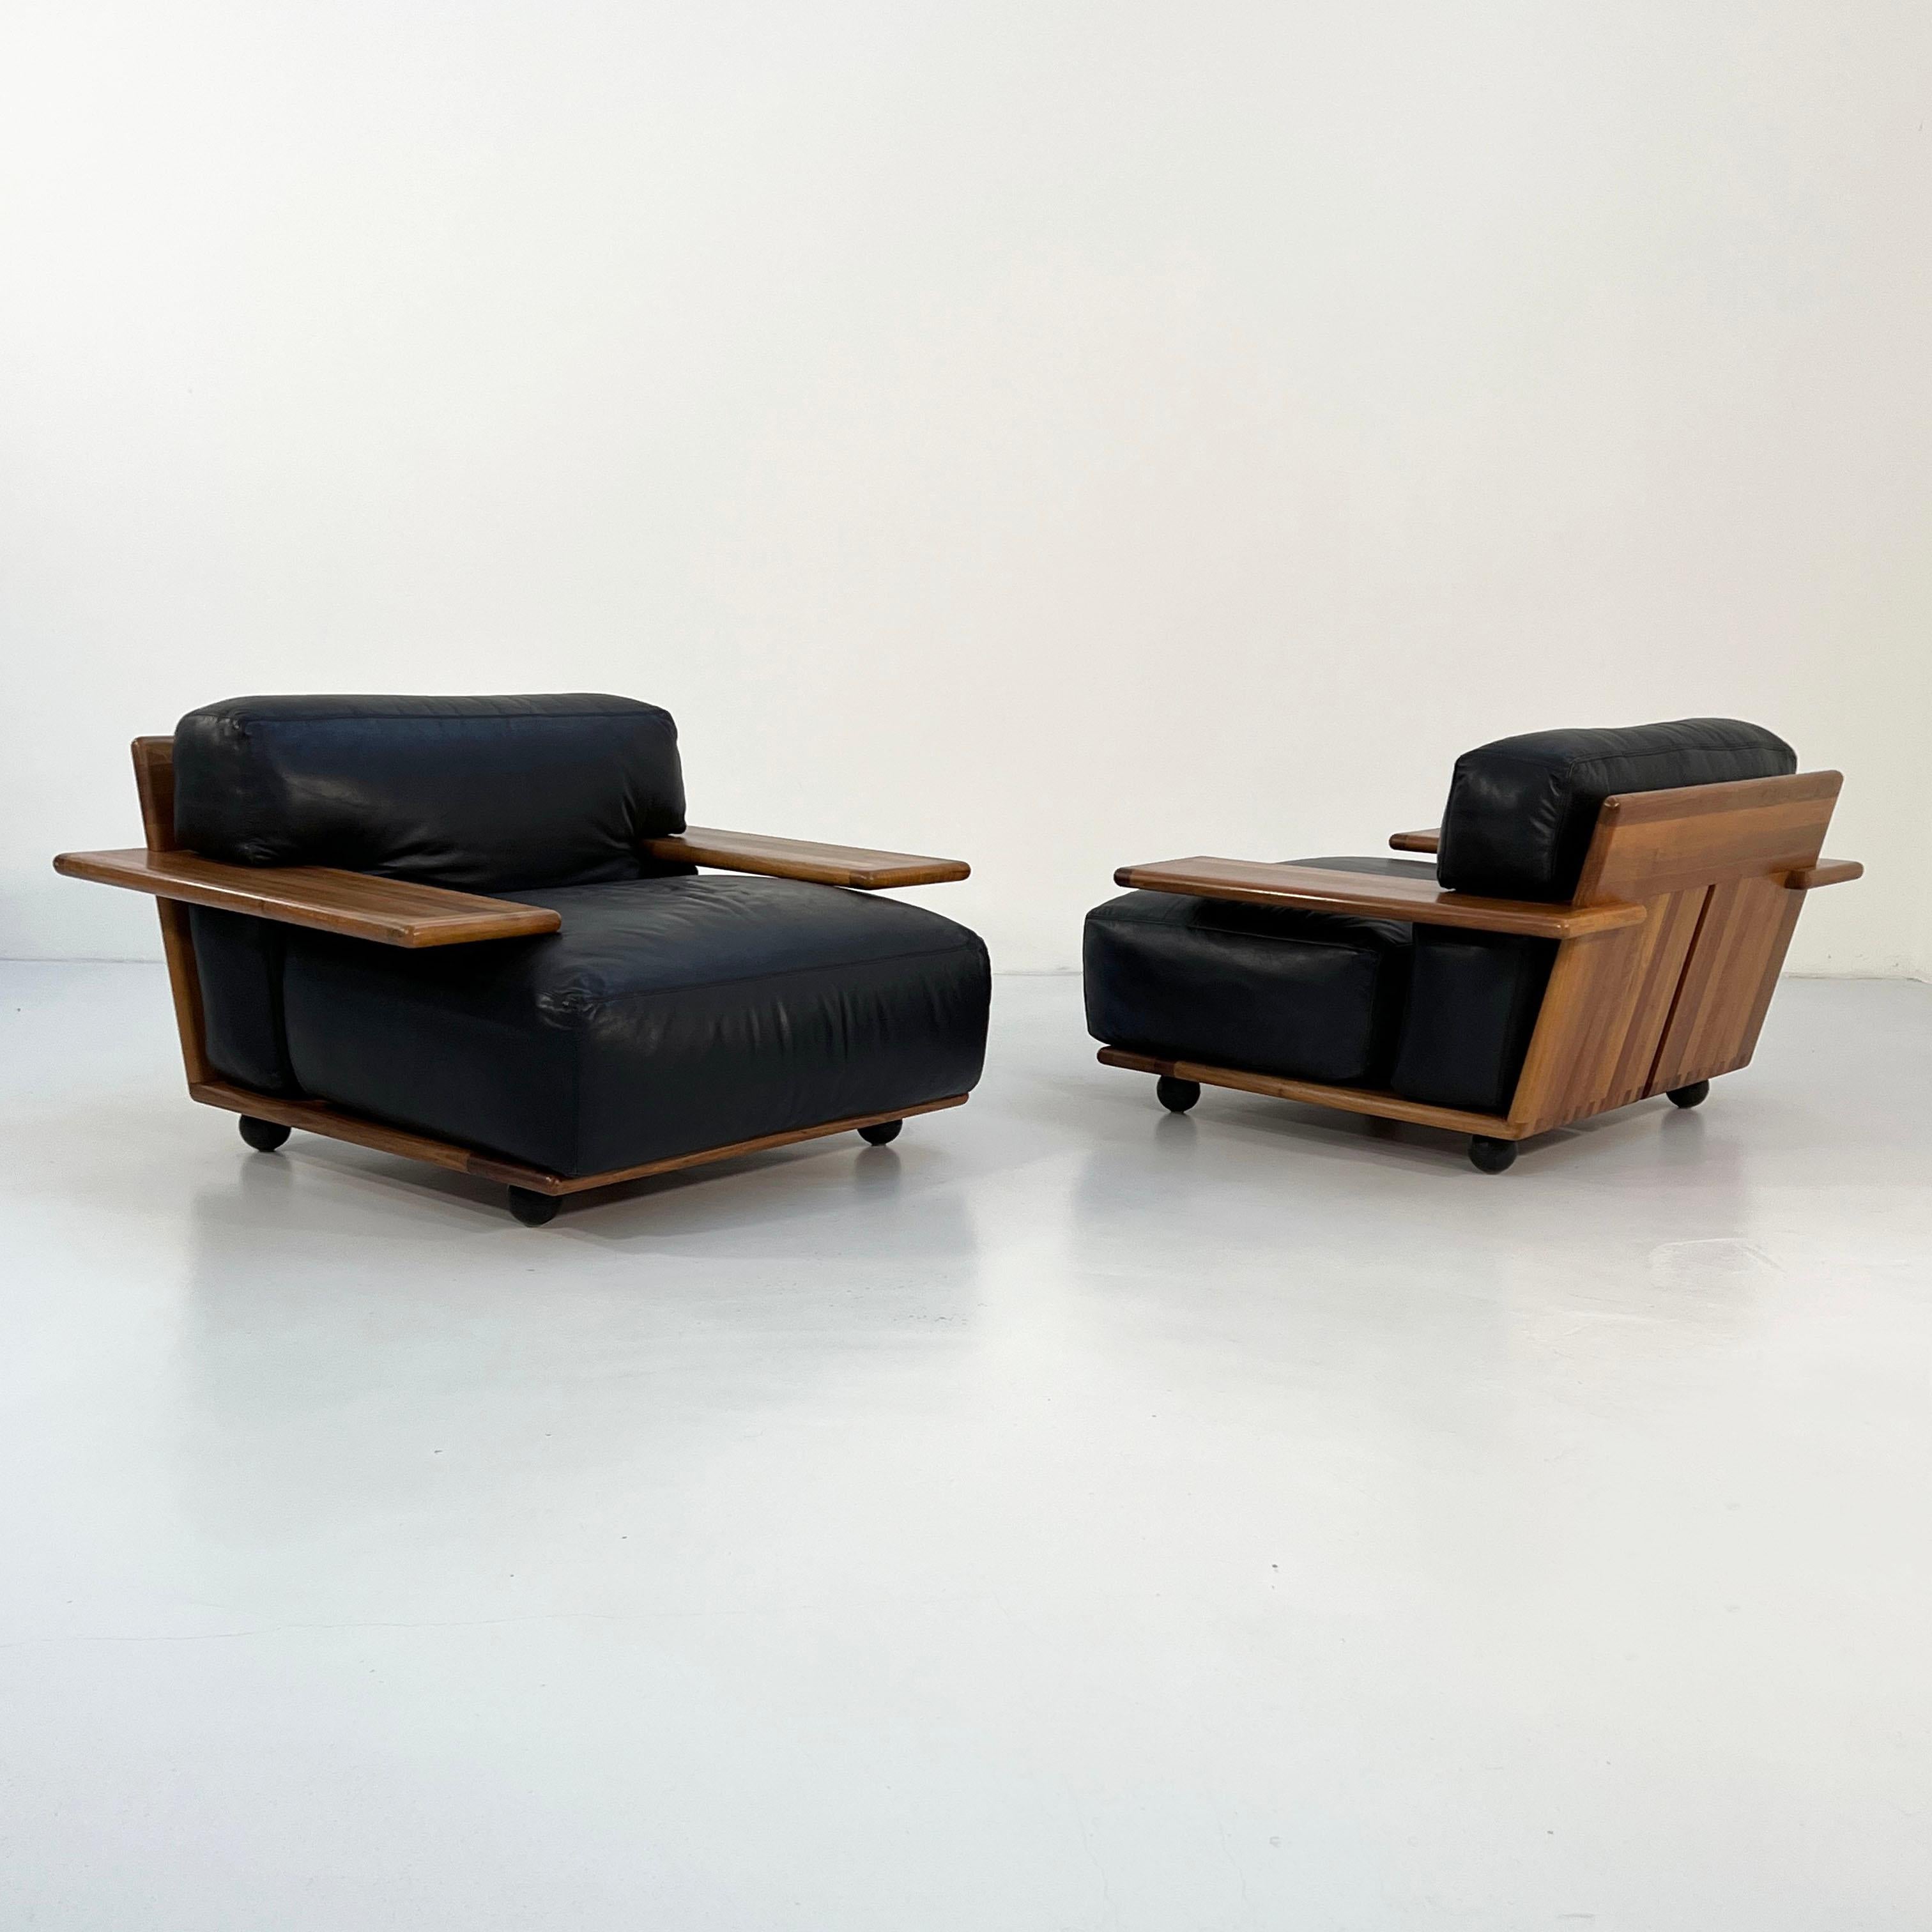 Modern Pianura Armchair in Black Leather by Mario Bellini for Cassina, 1970s For Sale